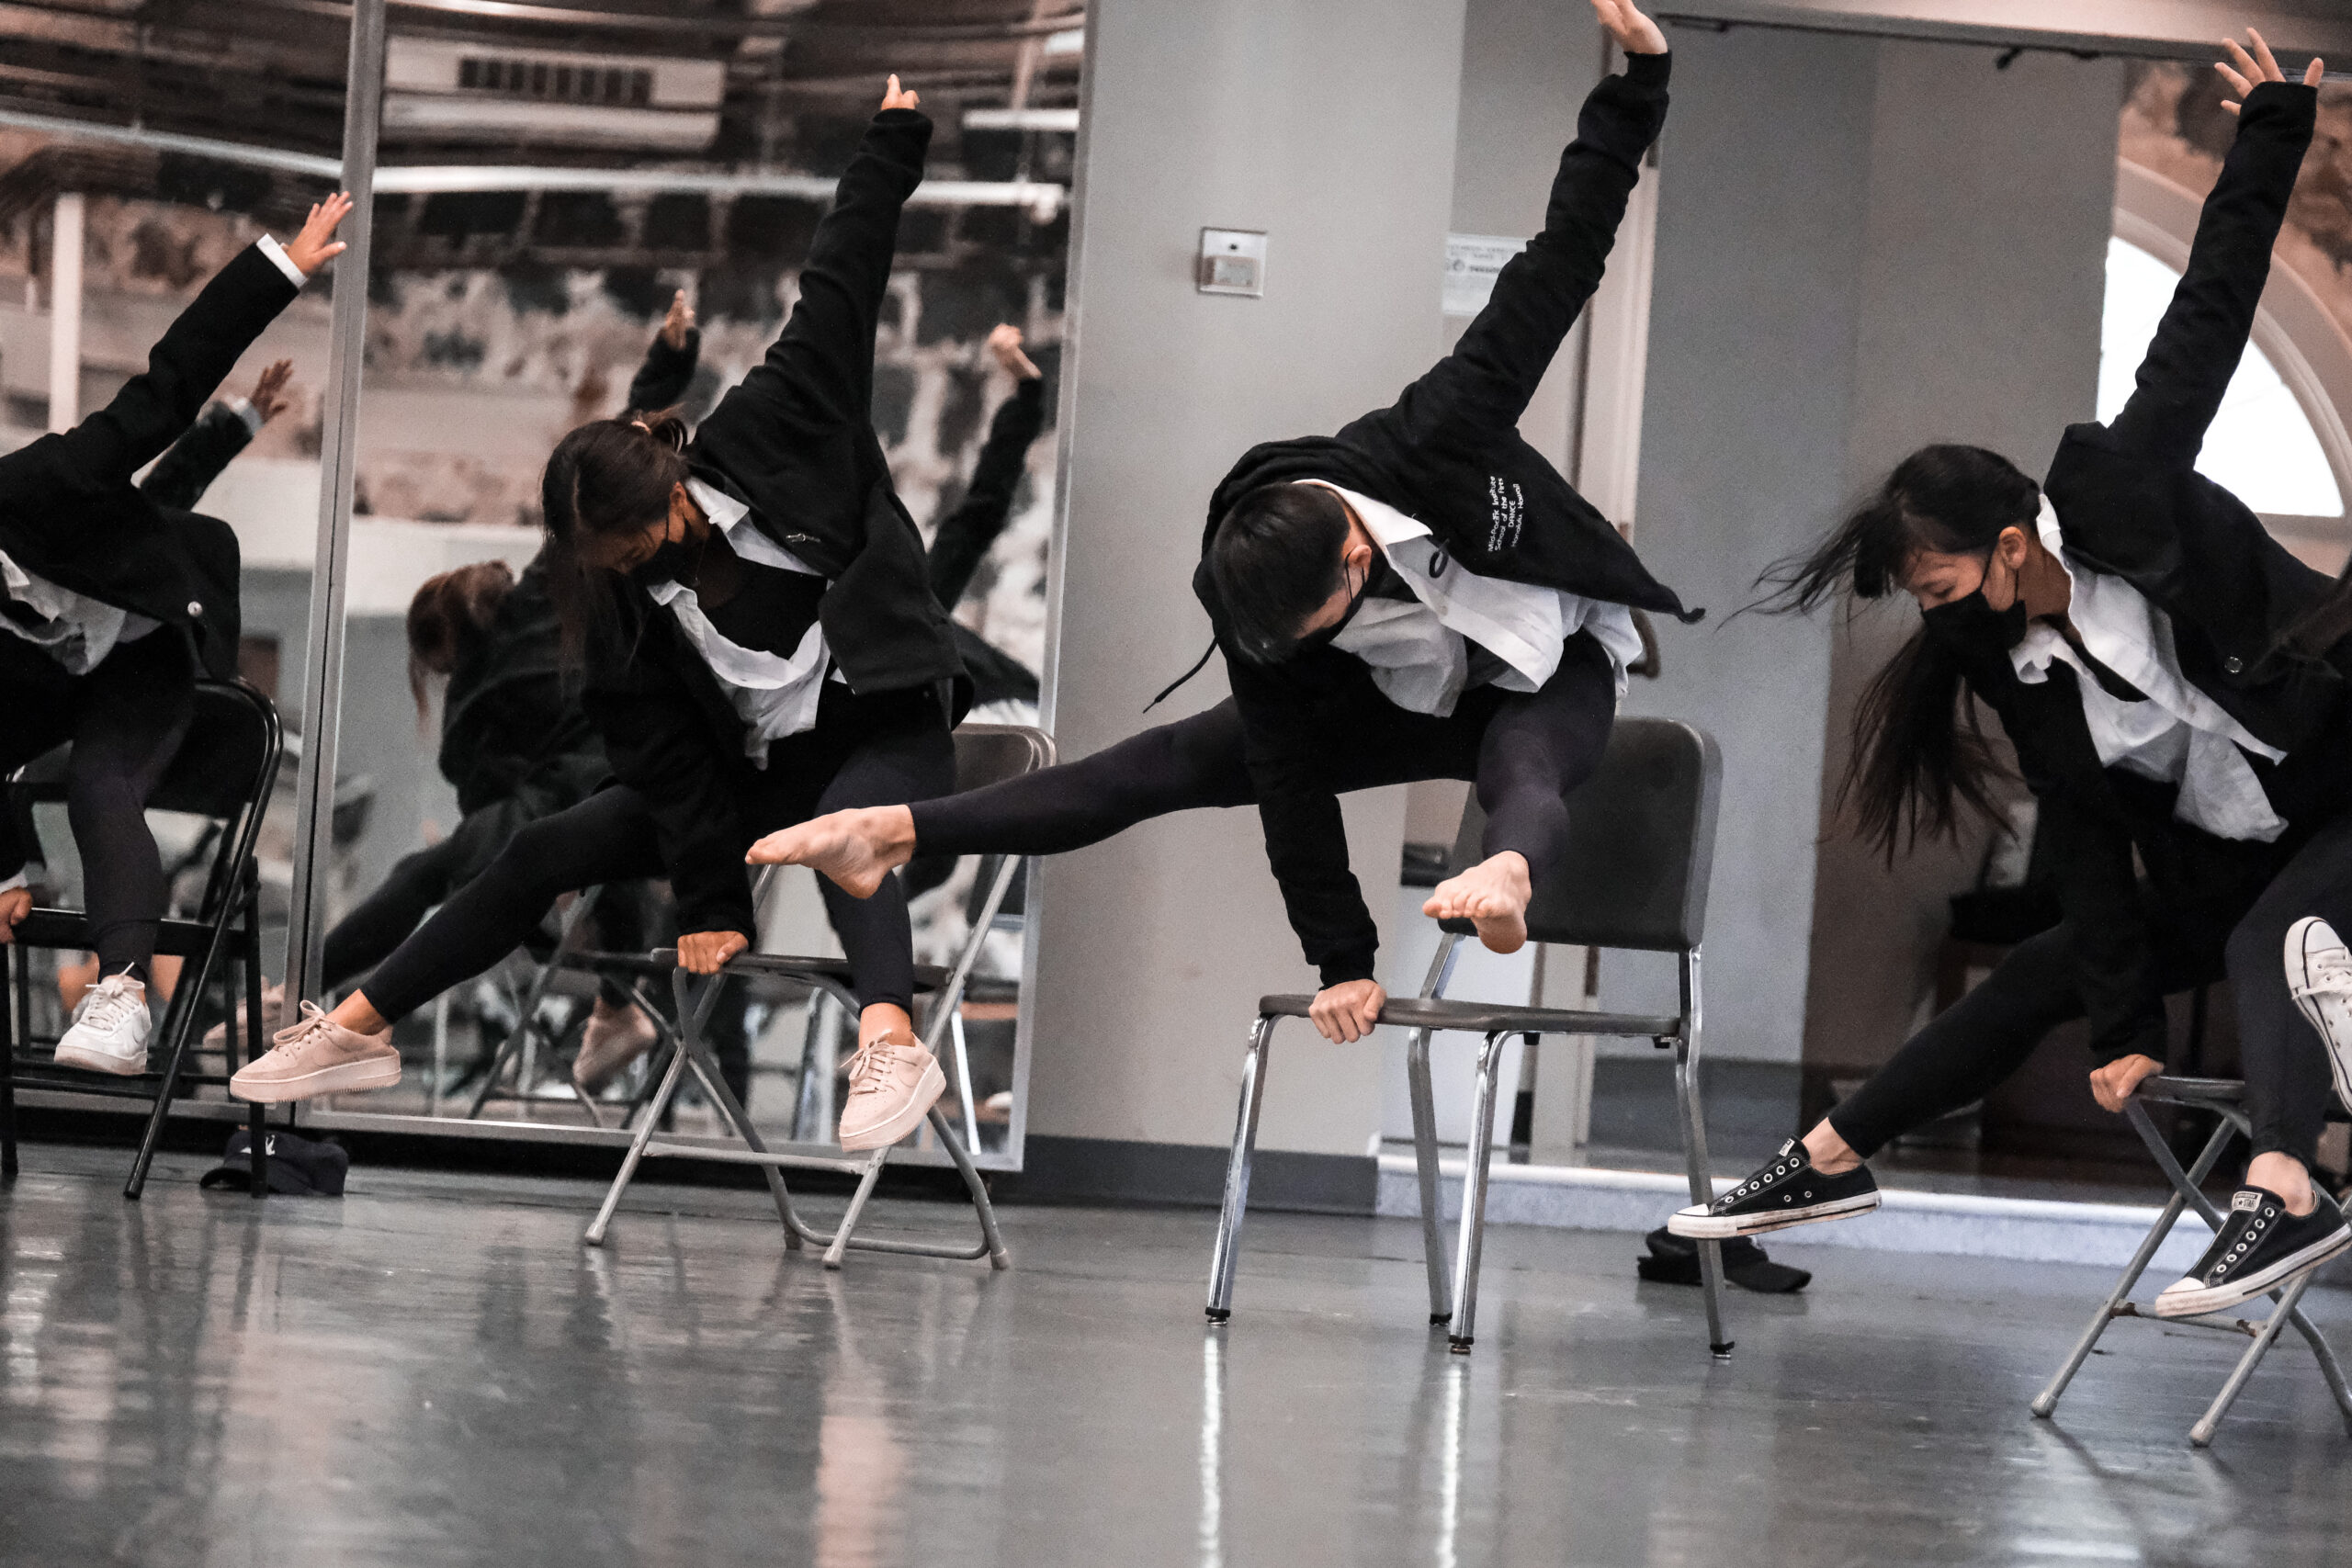 Contemporary Dance students perform ‘Minus 16’ by renowned choreographer, Ohad Naharin